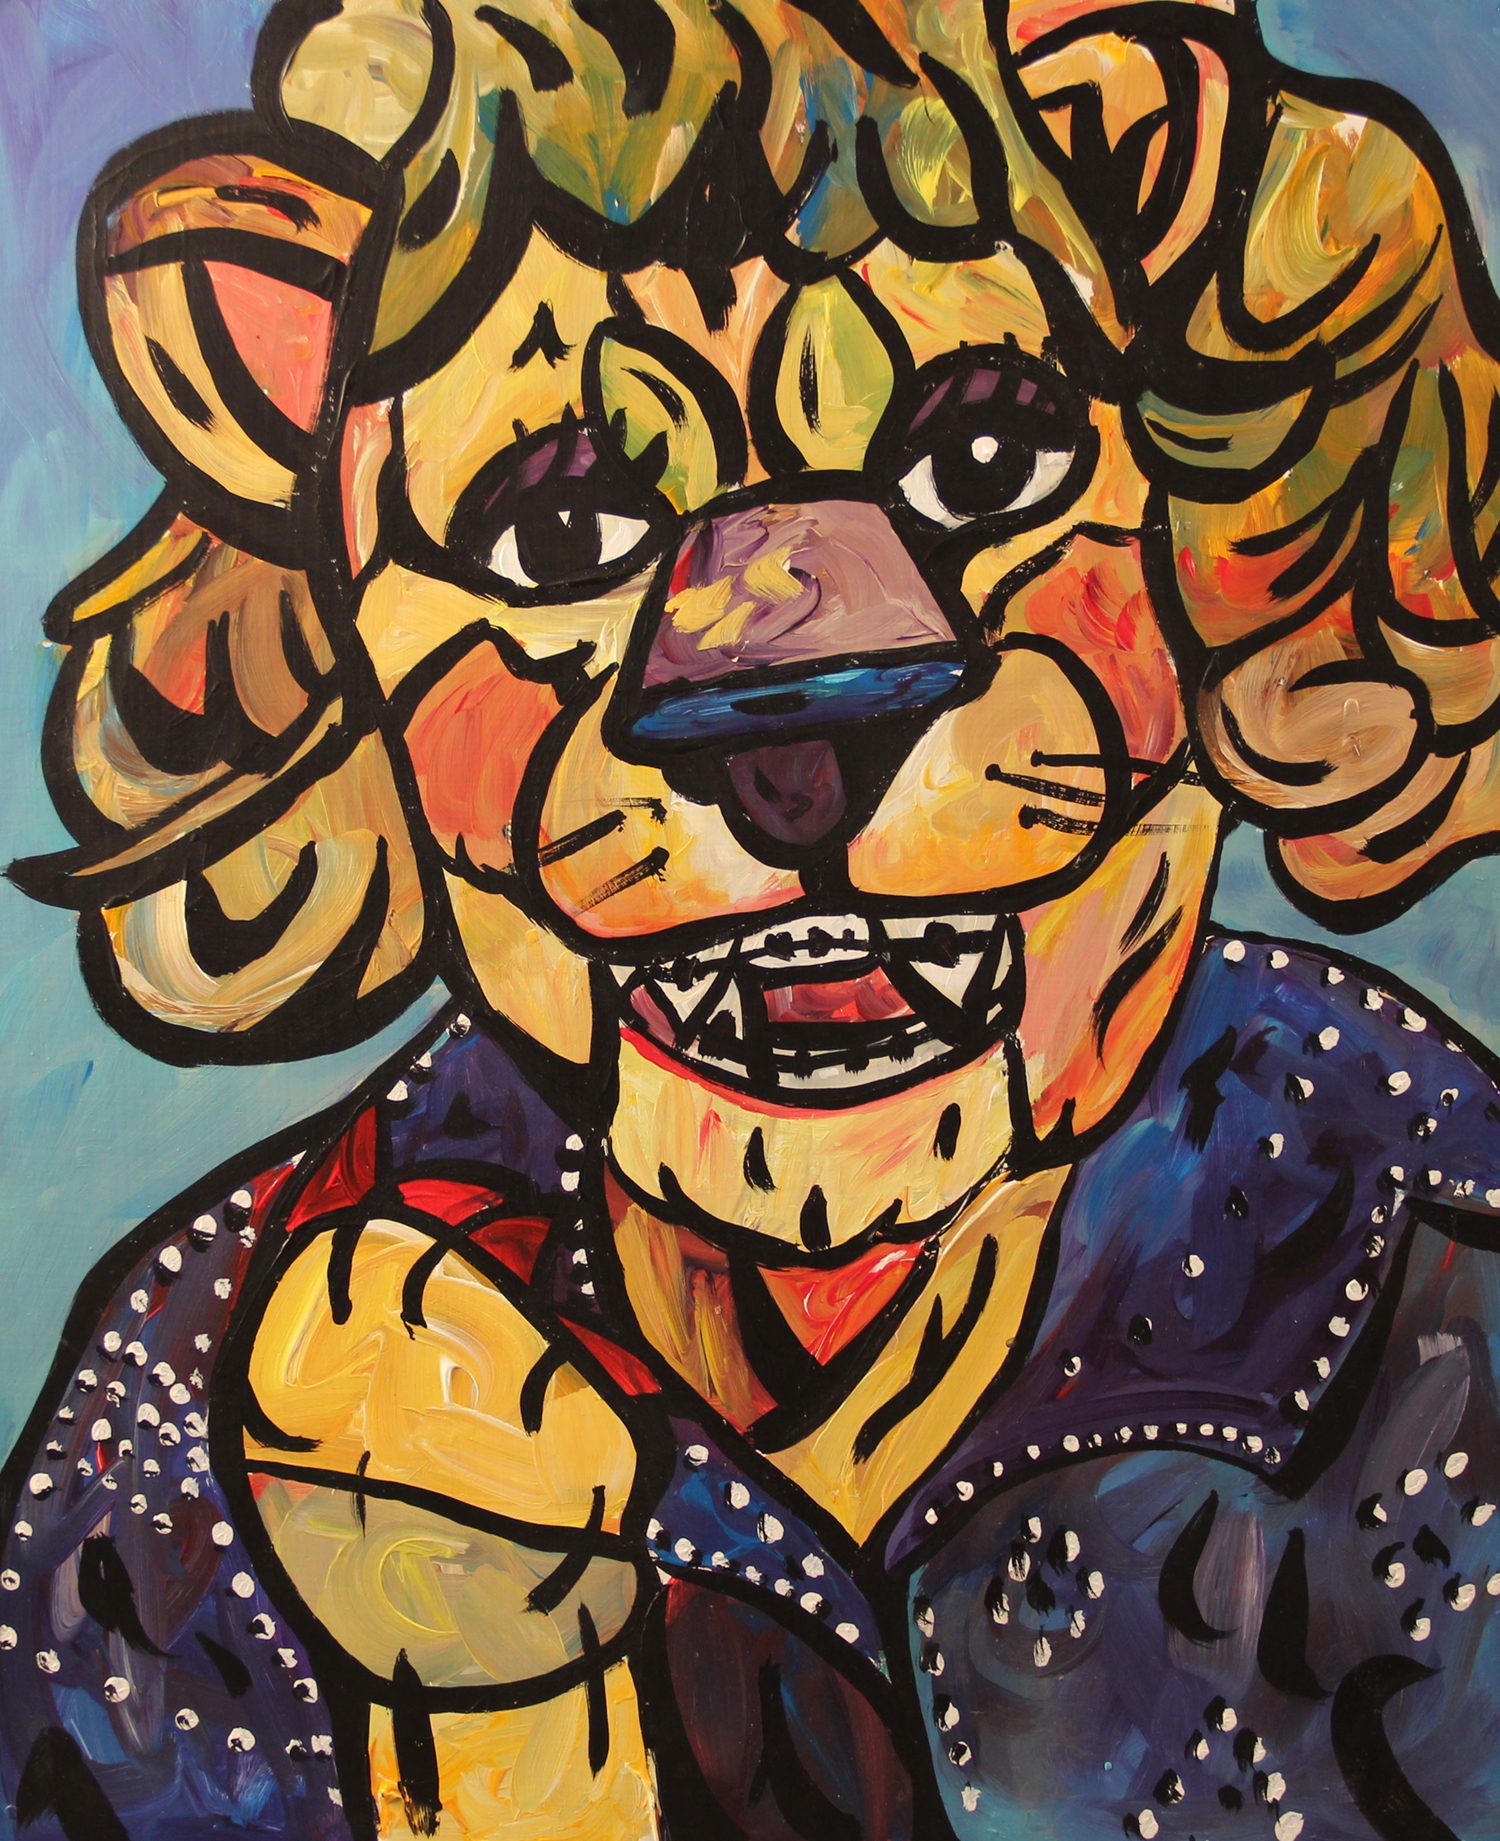 A smiling lion in a bedazzled jacket. Painting by Courtney Huston